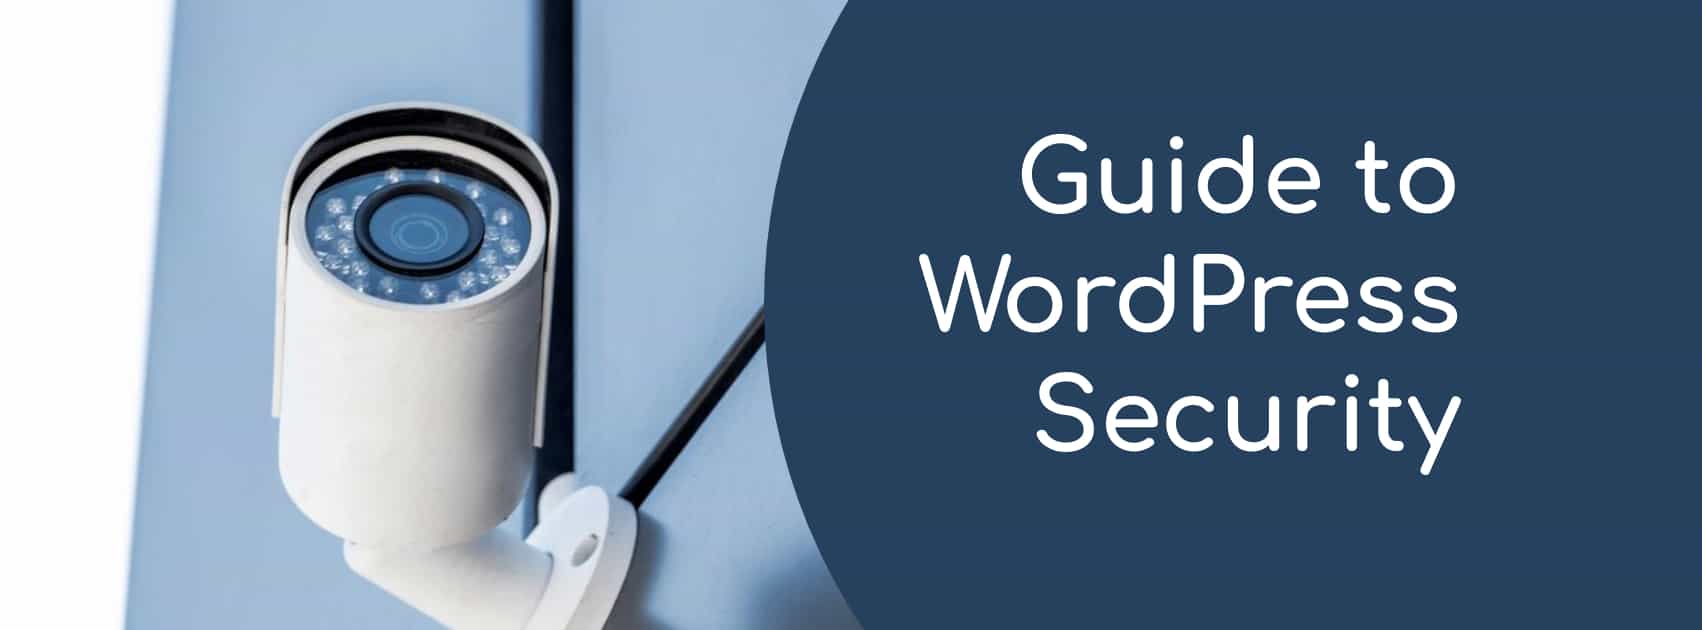 Guide to WordPress Security